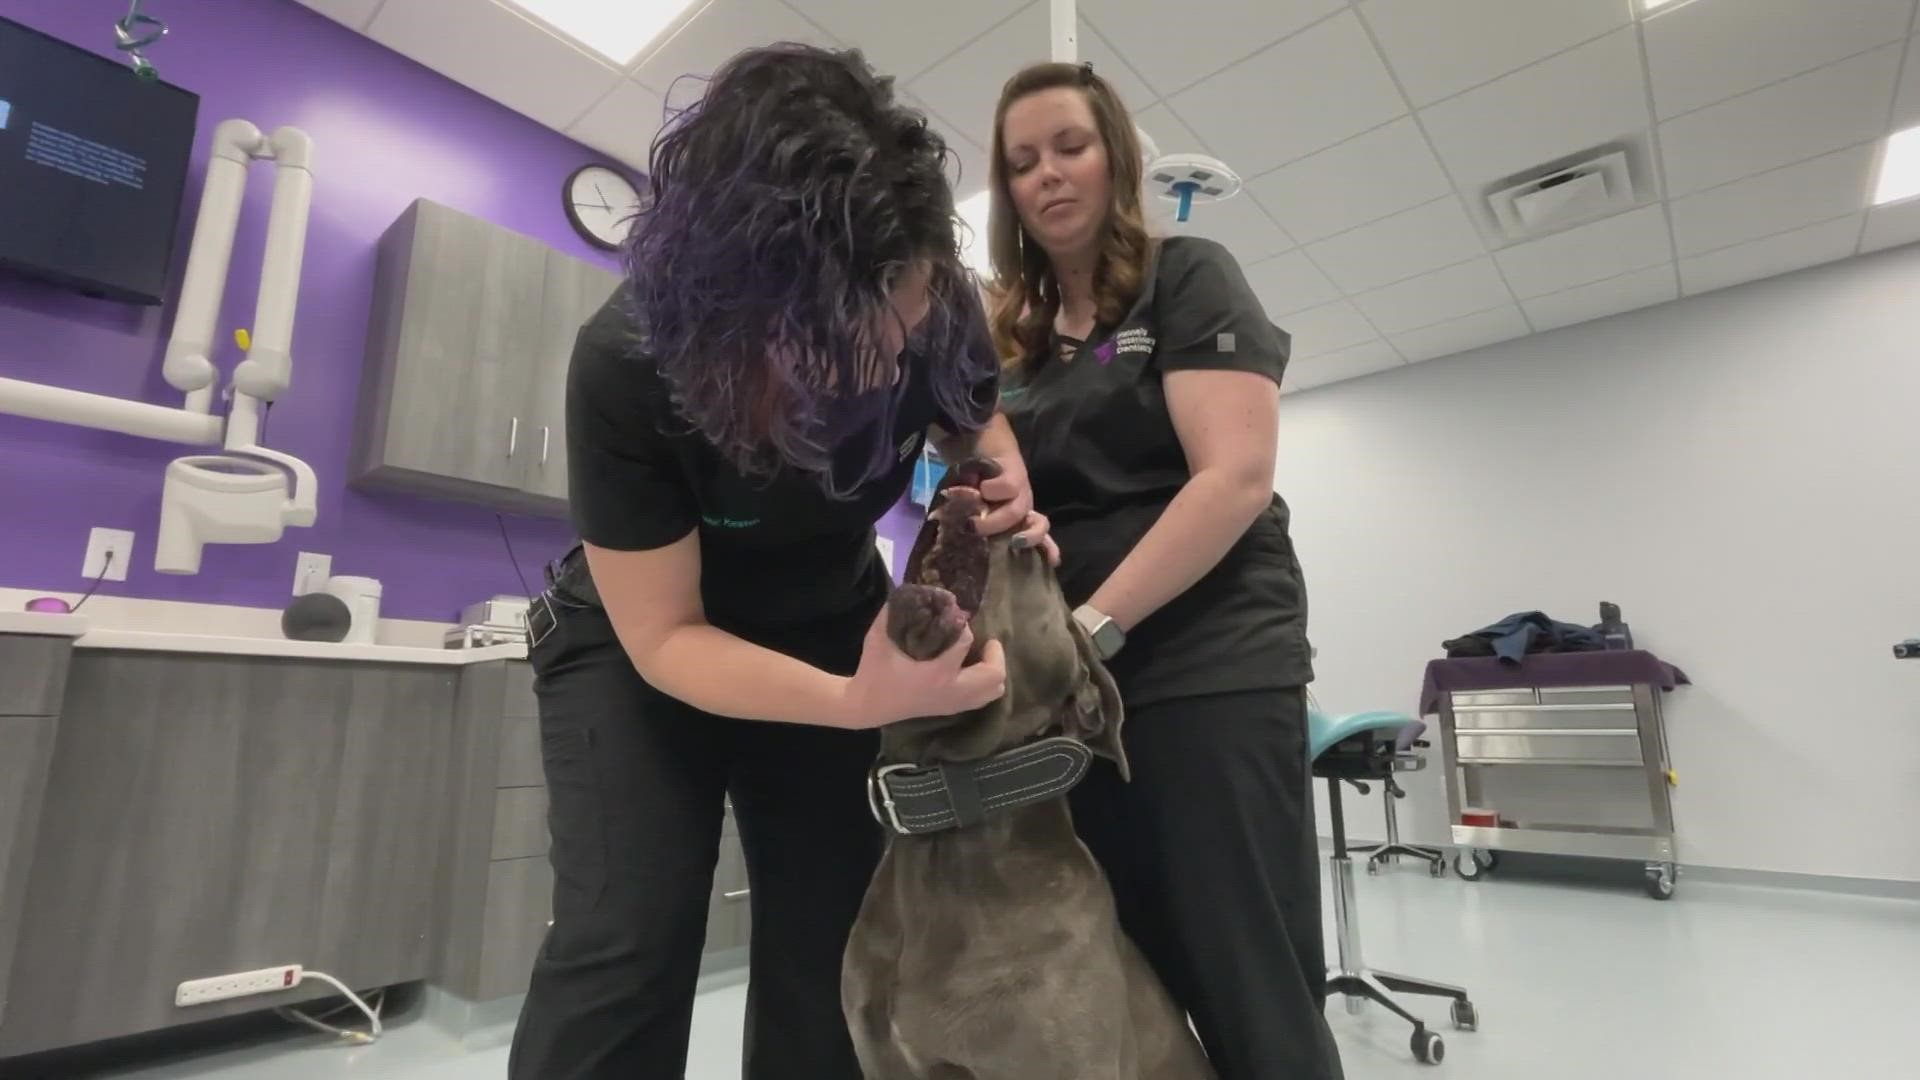 For Pet Dental Health Month in February, we asked a Windham veterinarian for some tips and tricks.